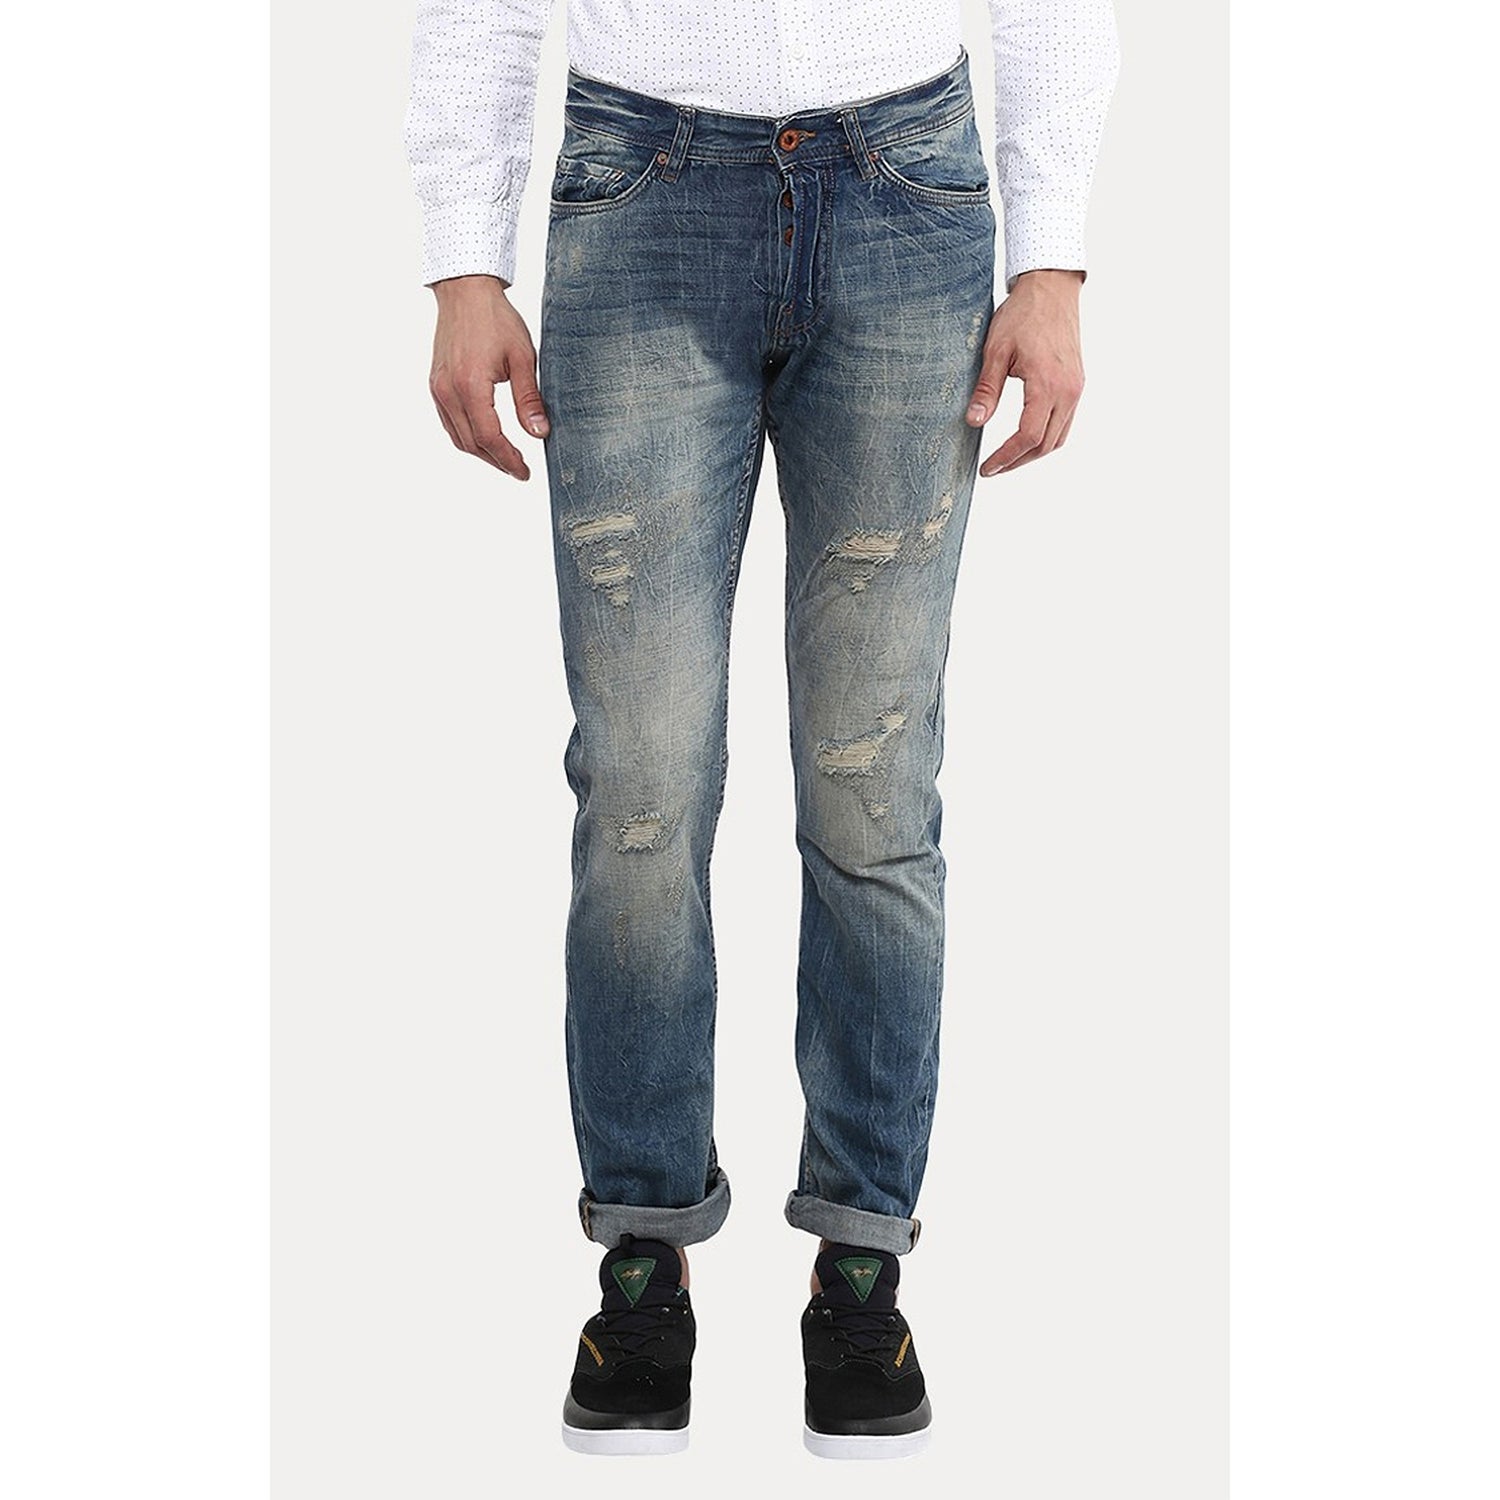 Men's Blue Cotton Solid Ripped Jeans (LOMARBLE)